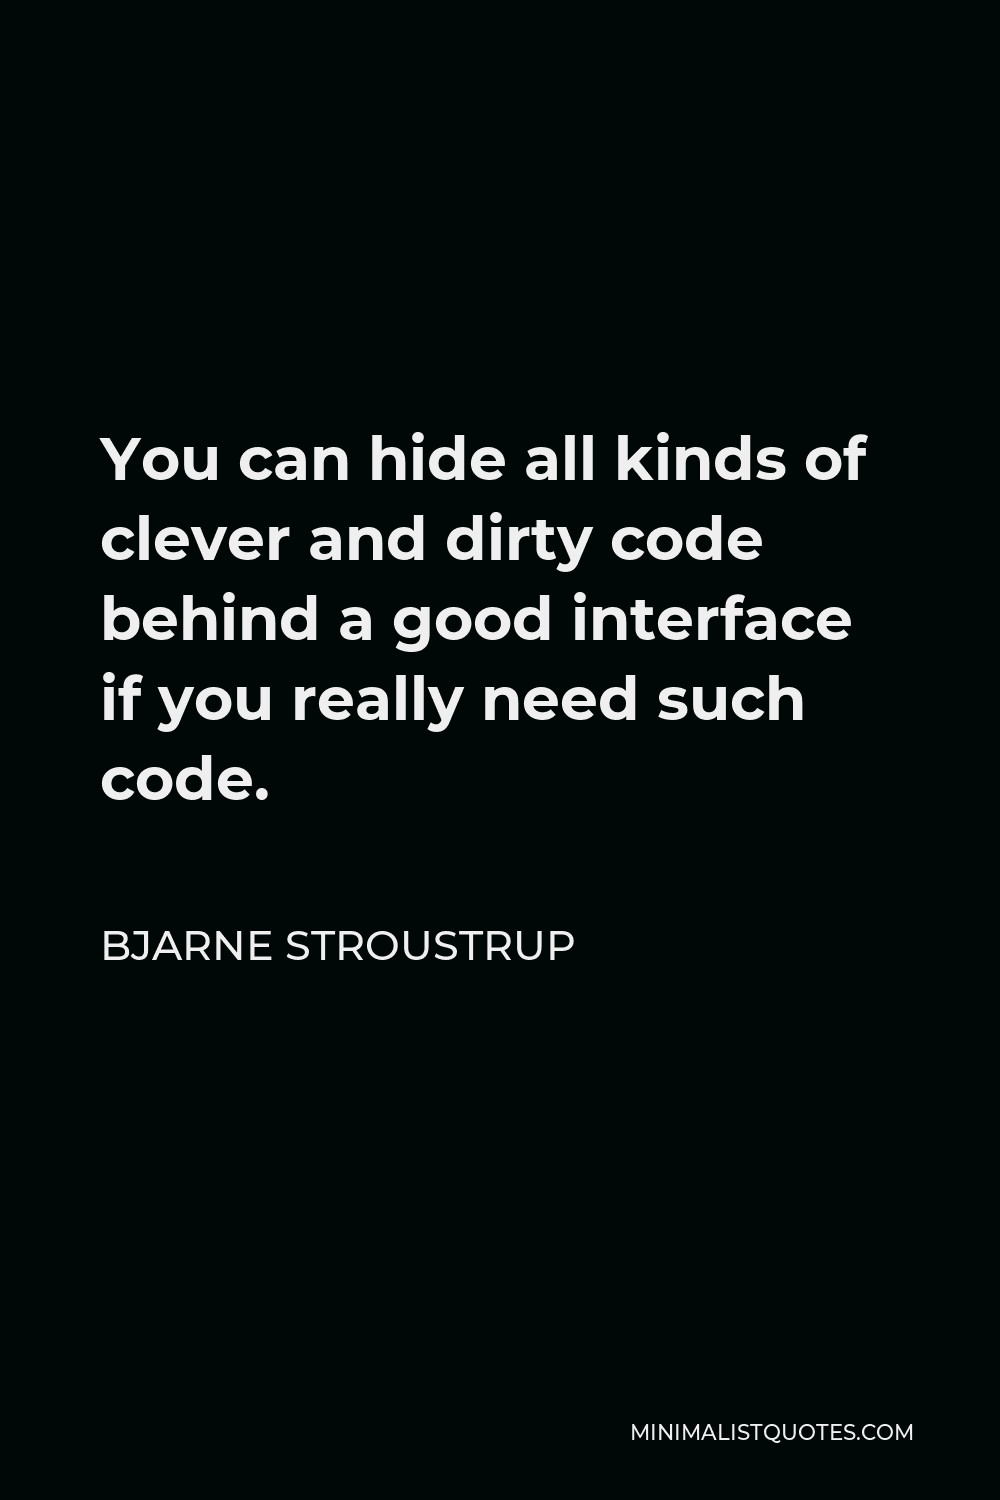 Bjarne Stroustrup Quote - You can hide all kinds of clever and dirty code behind a good interface if you really need such code.